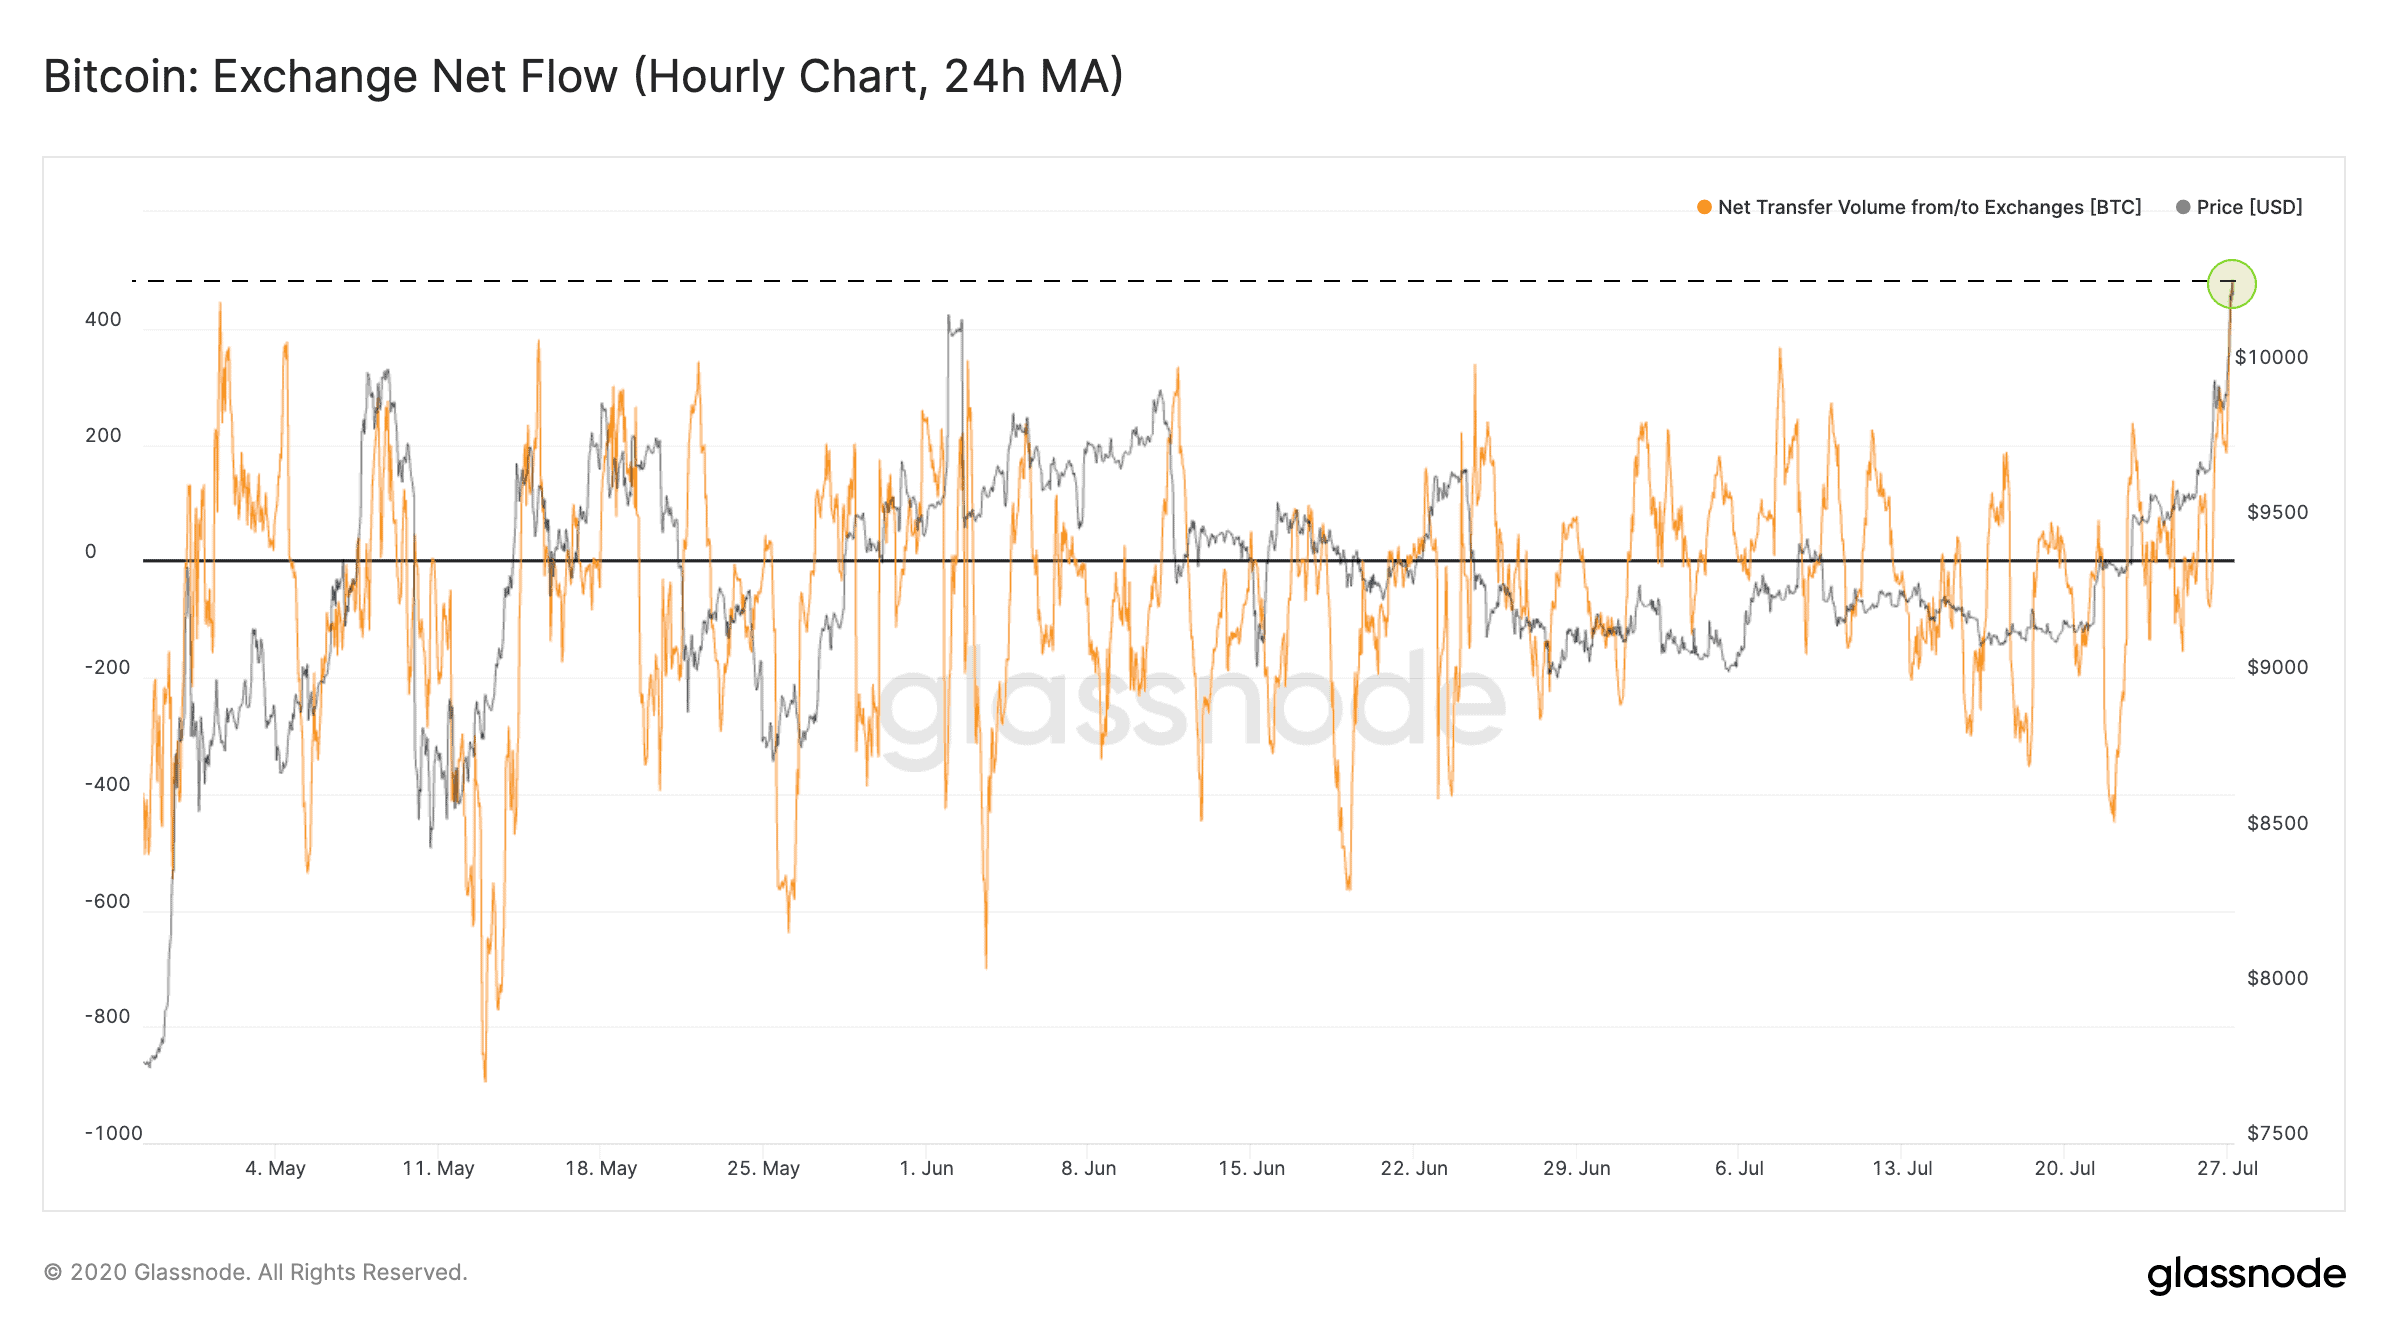 Bitcoin Net Flow to Exchanges At 3-Month High